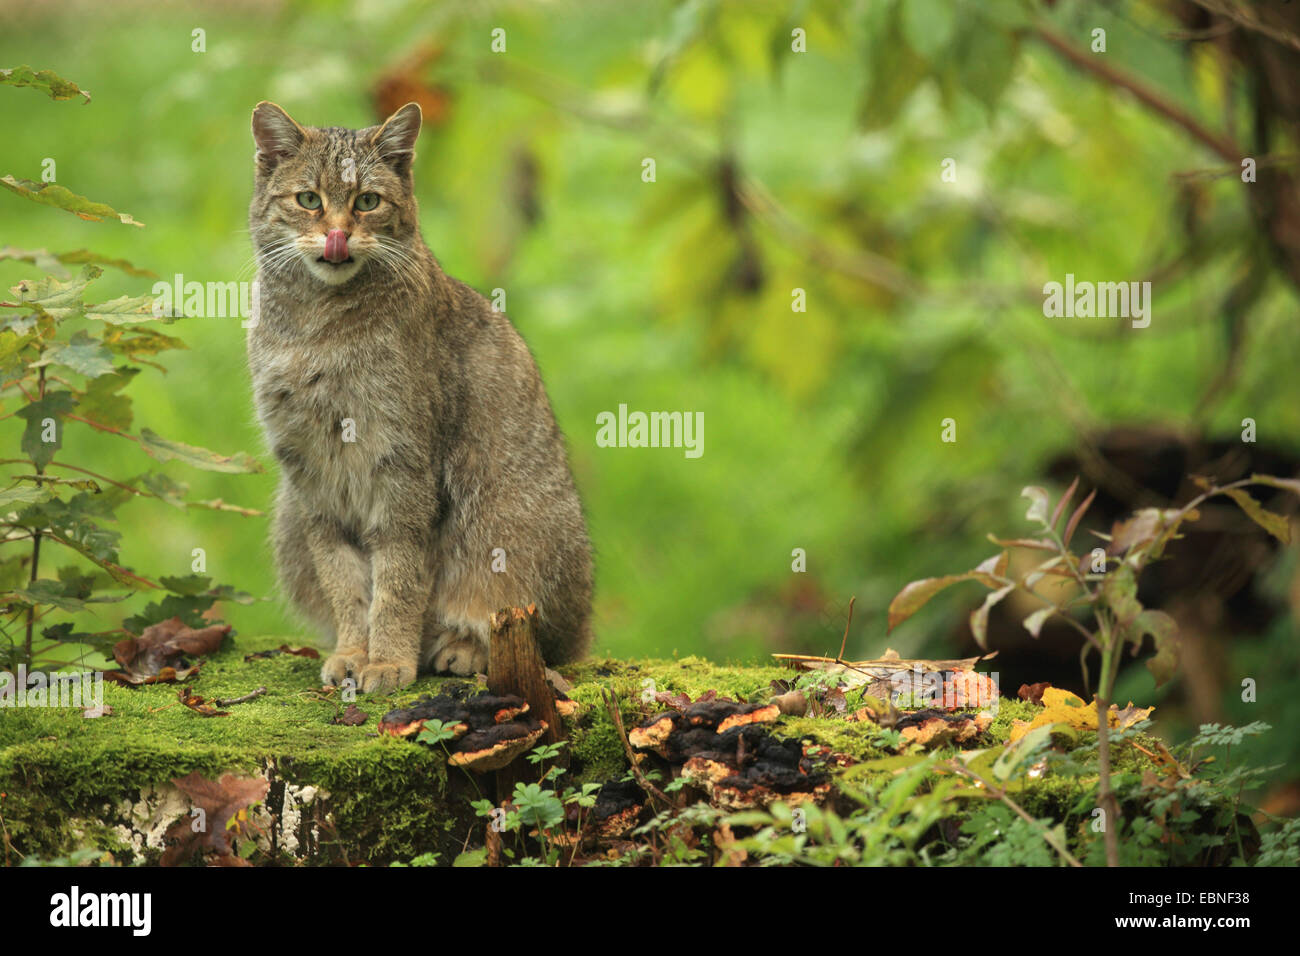 European wildcat, forest wildcat (Felis silvestris silvestris), sitting on mossy forest ground and licking its nose, Germany, Bavaria Stock Photo